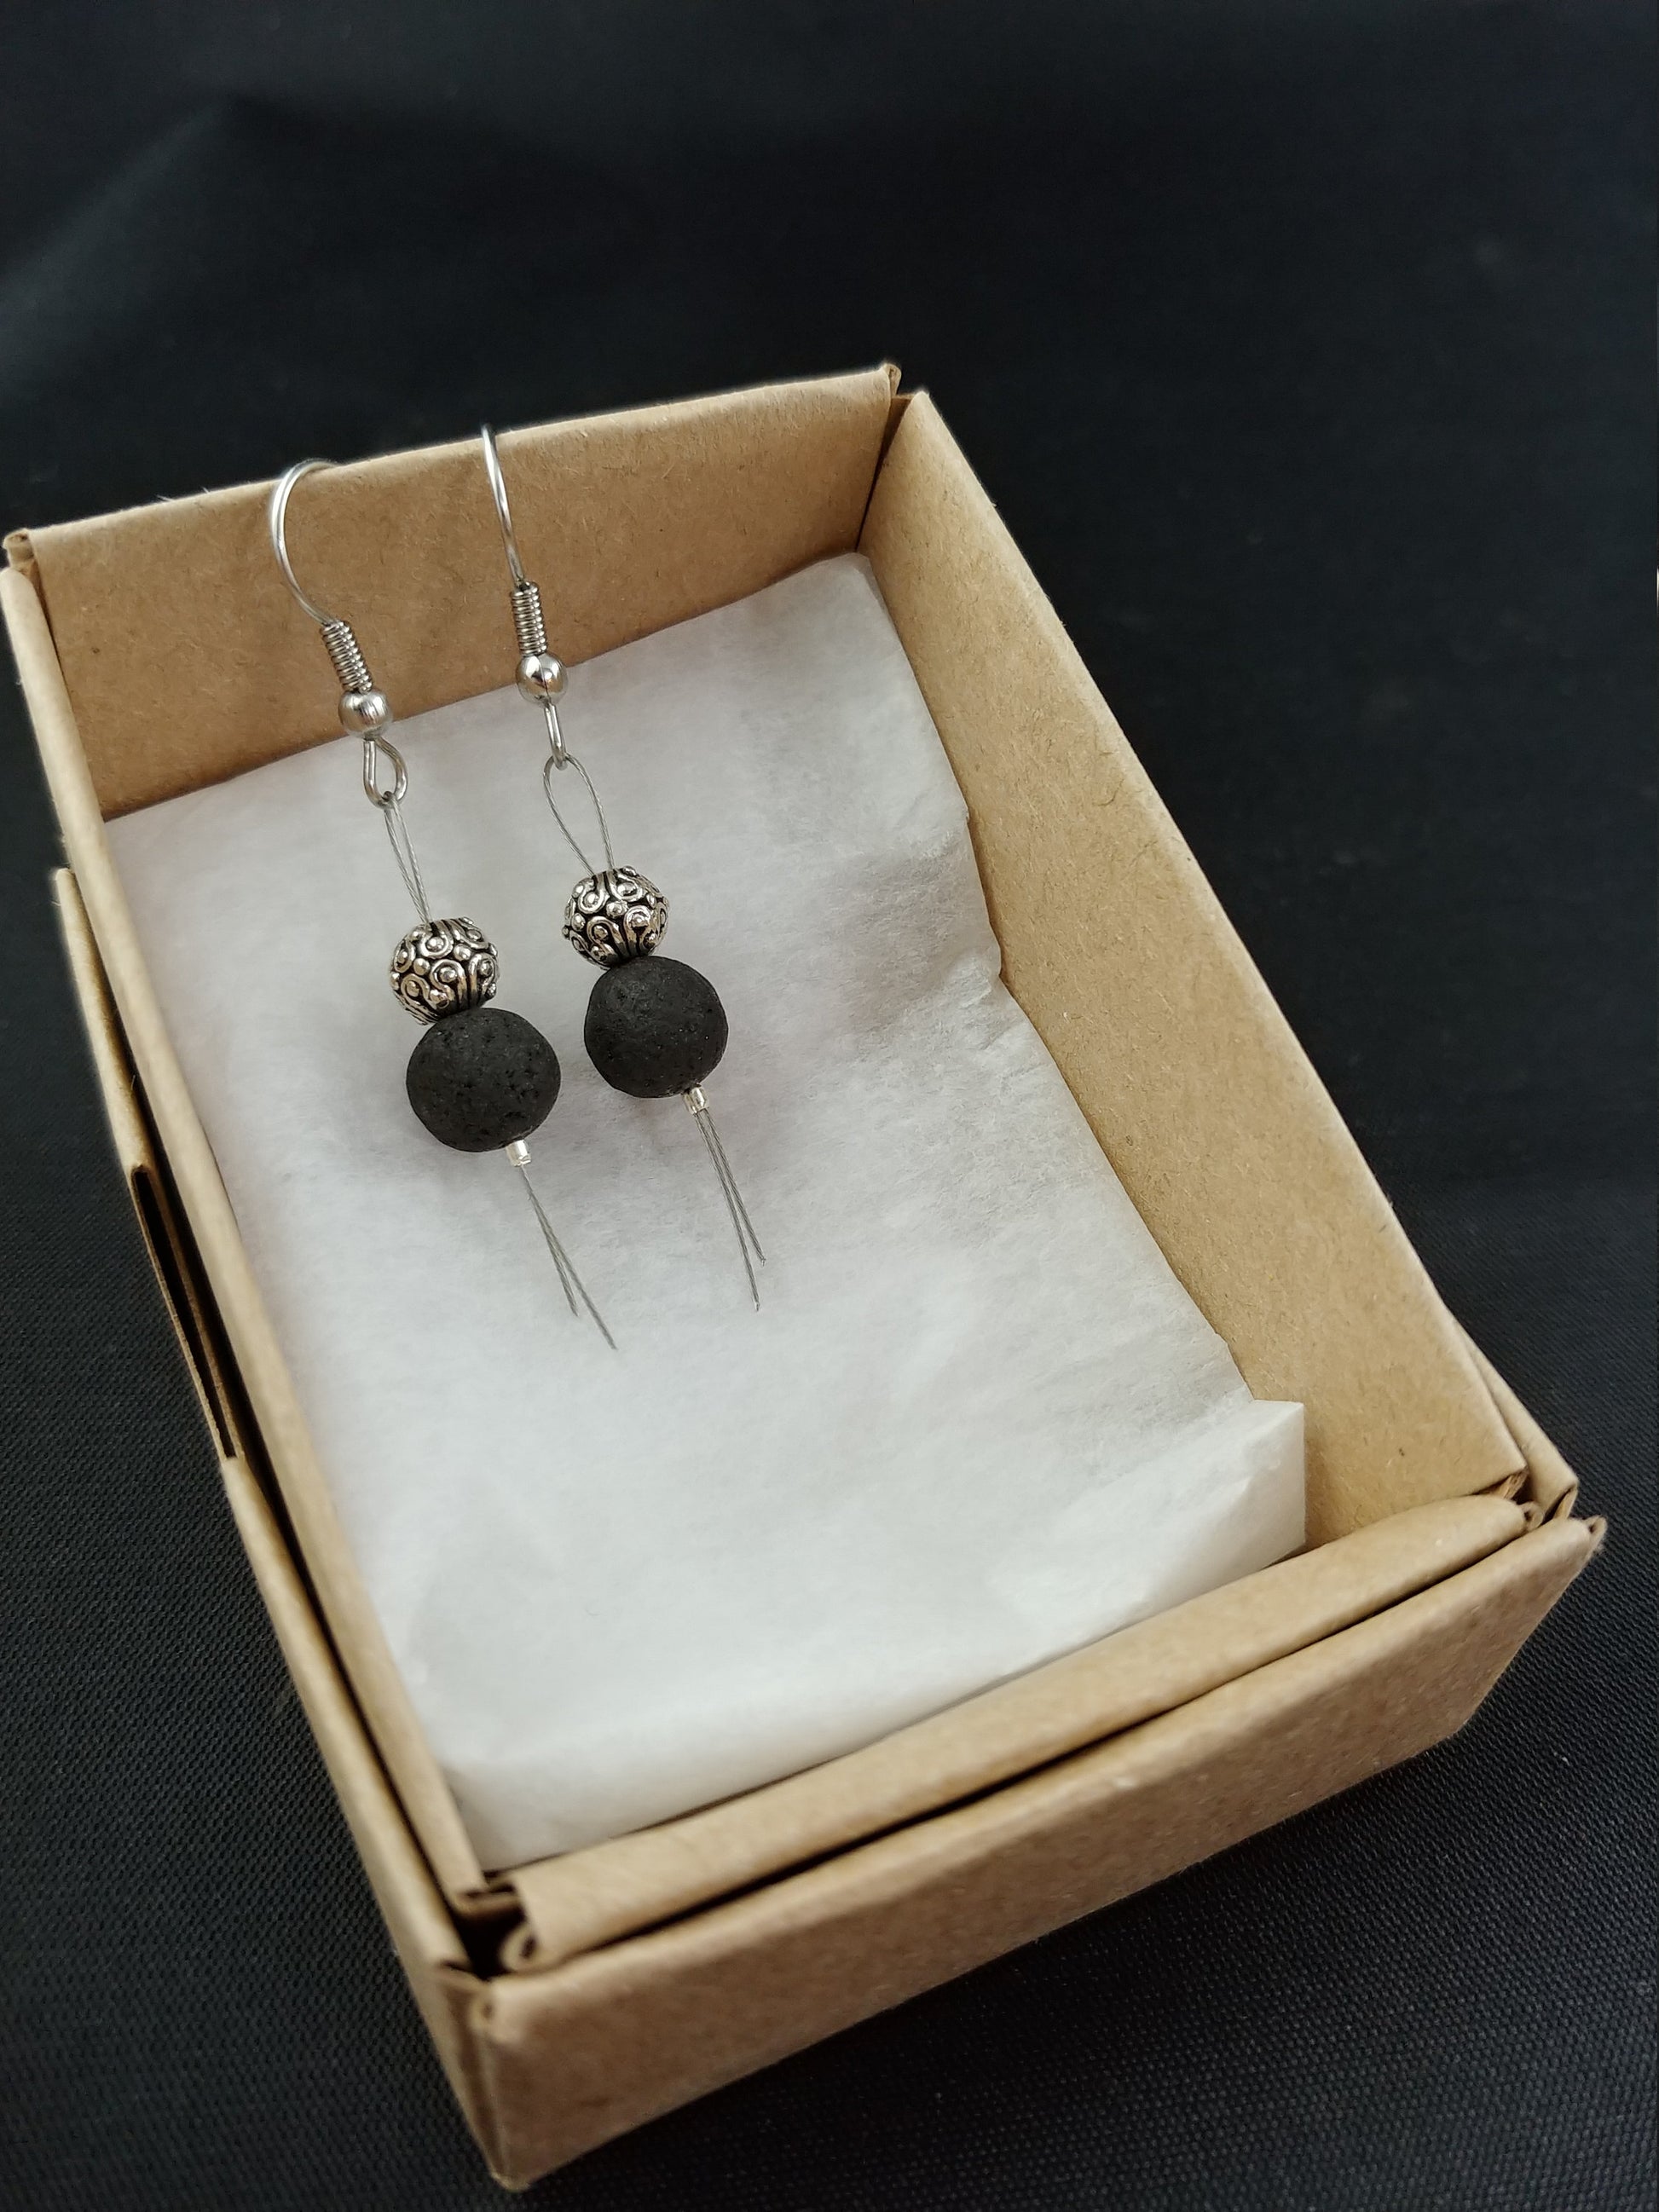 Iceland lava earrings with Lava Rock, Round spacer bead, and silver straw